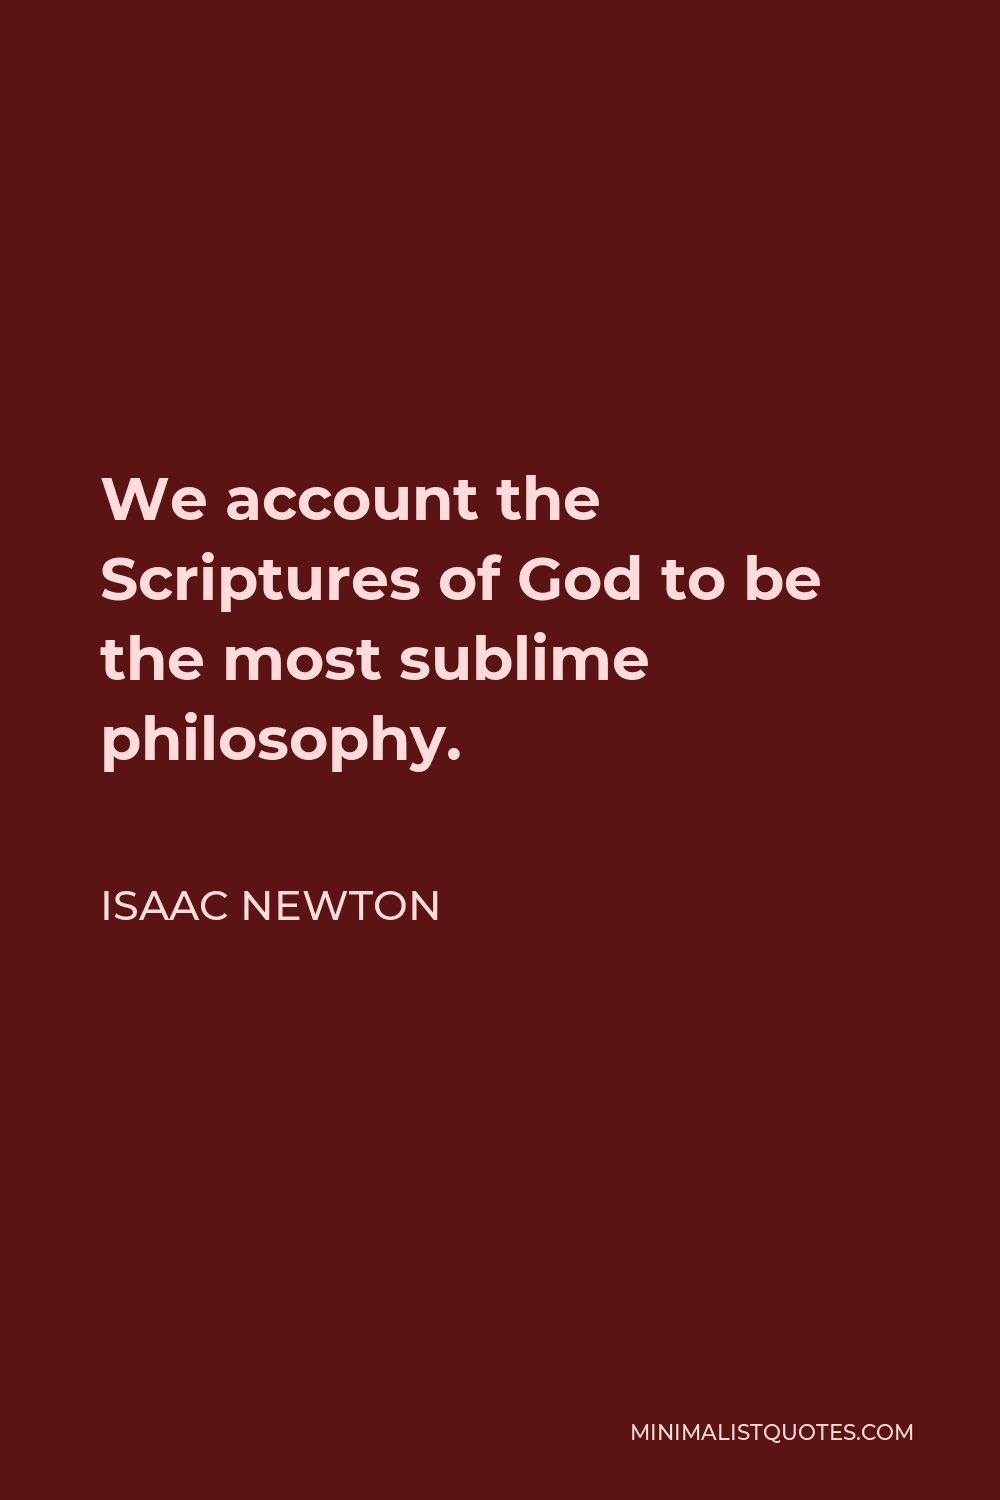 Isaac Newton Quote - We account the Scriptures of God to be the most sublime philosophy.